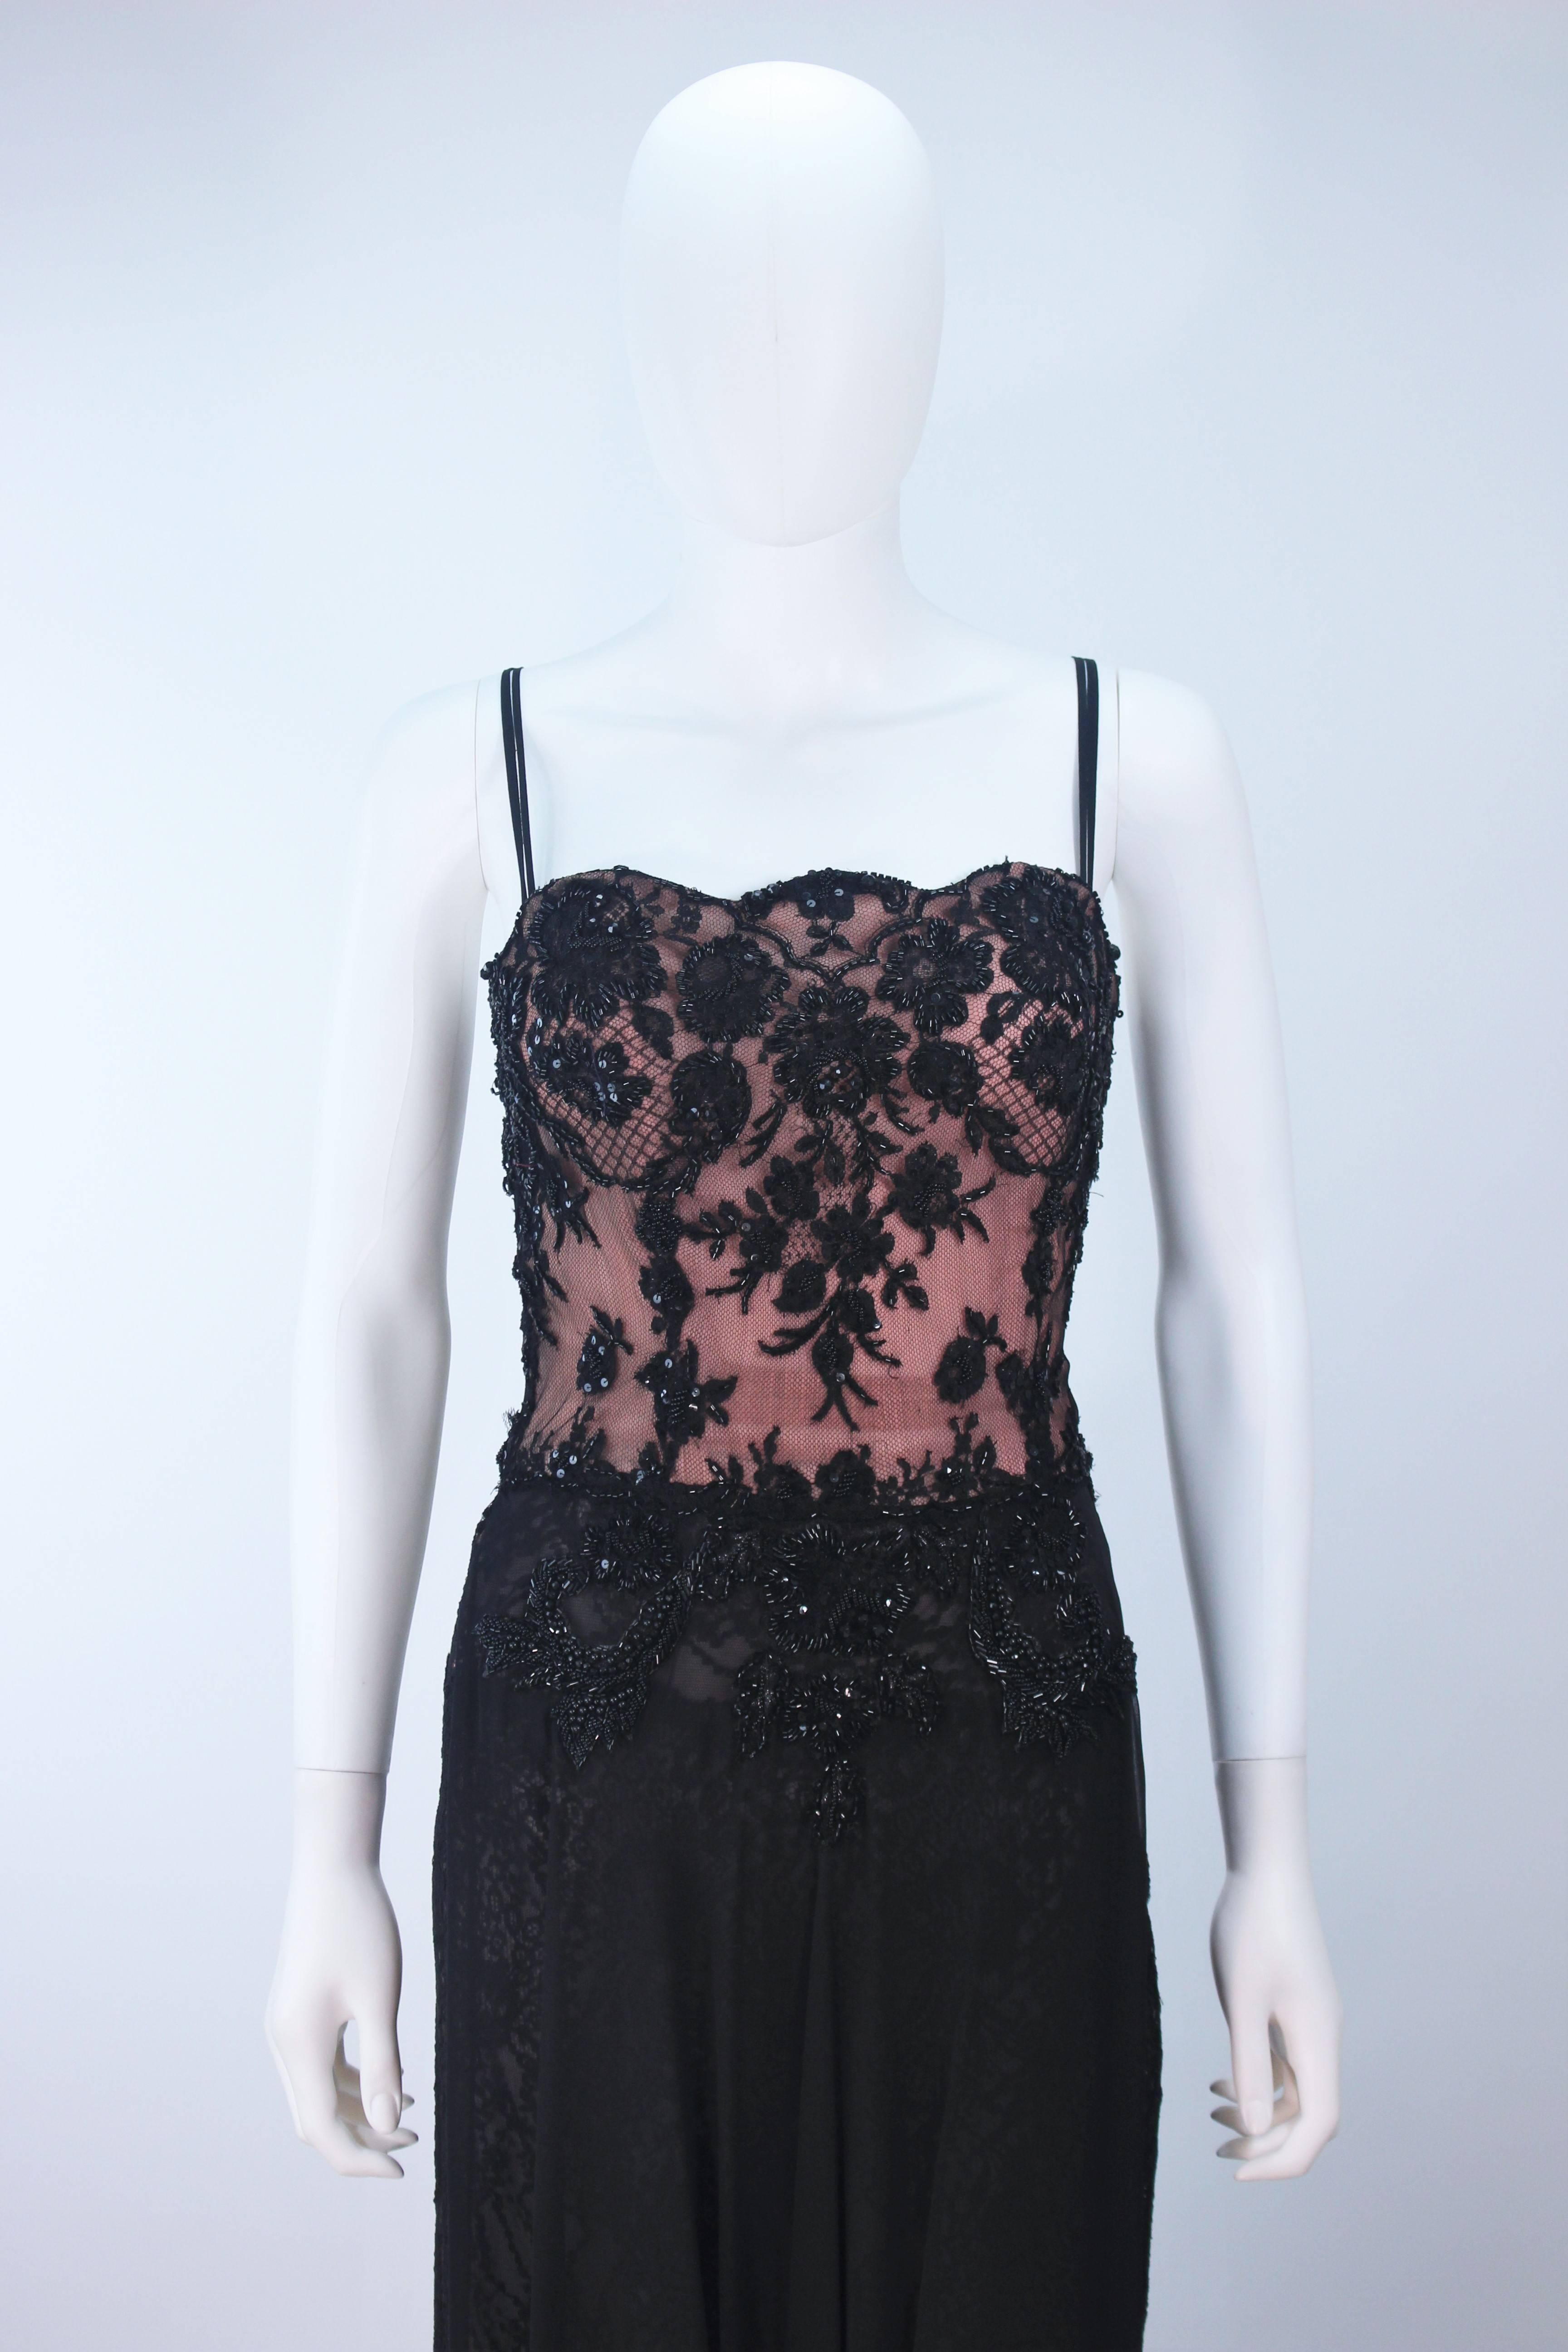 FE ZANDI Beverly Hills Beaded Black Lace Chiffon Gown Size 4 6 In Excellent Condition For Sale In Los Angeles, CA